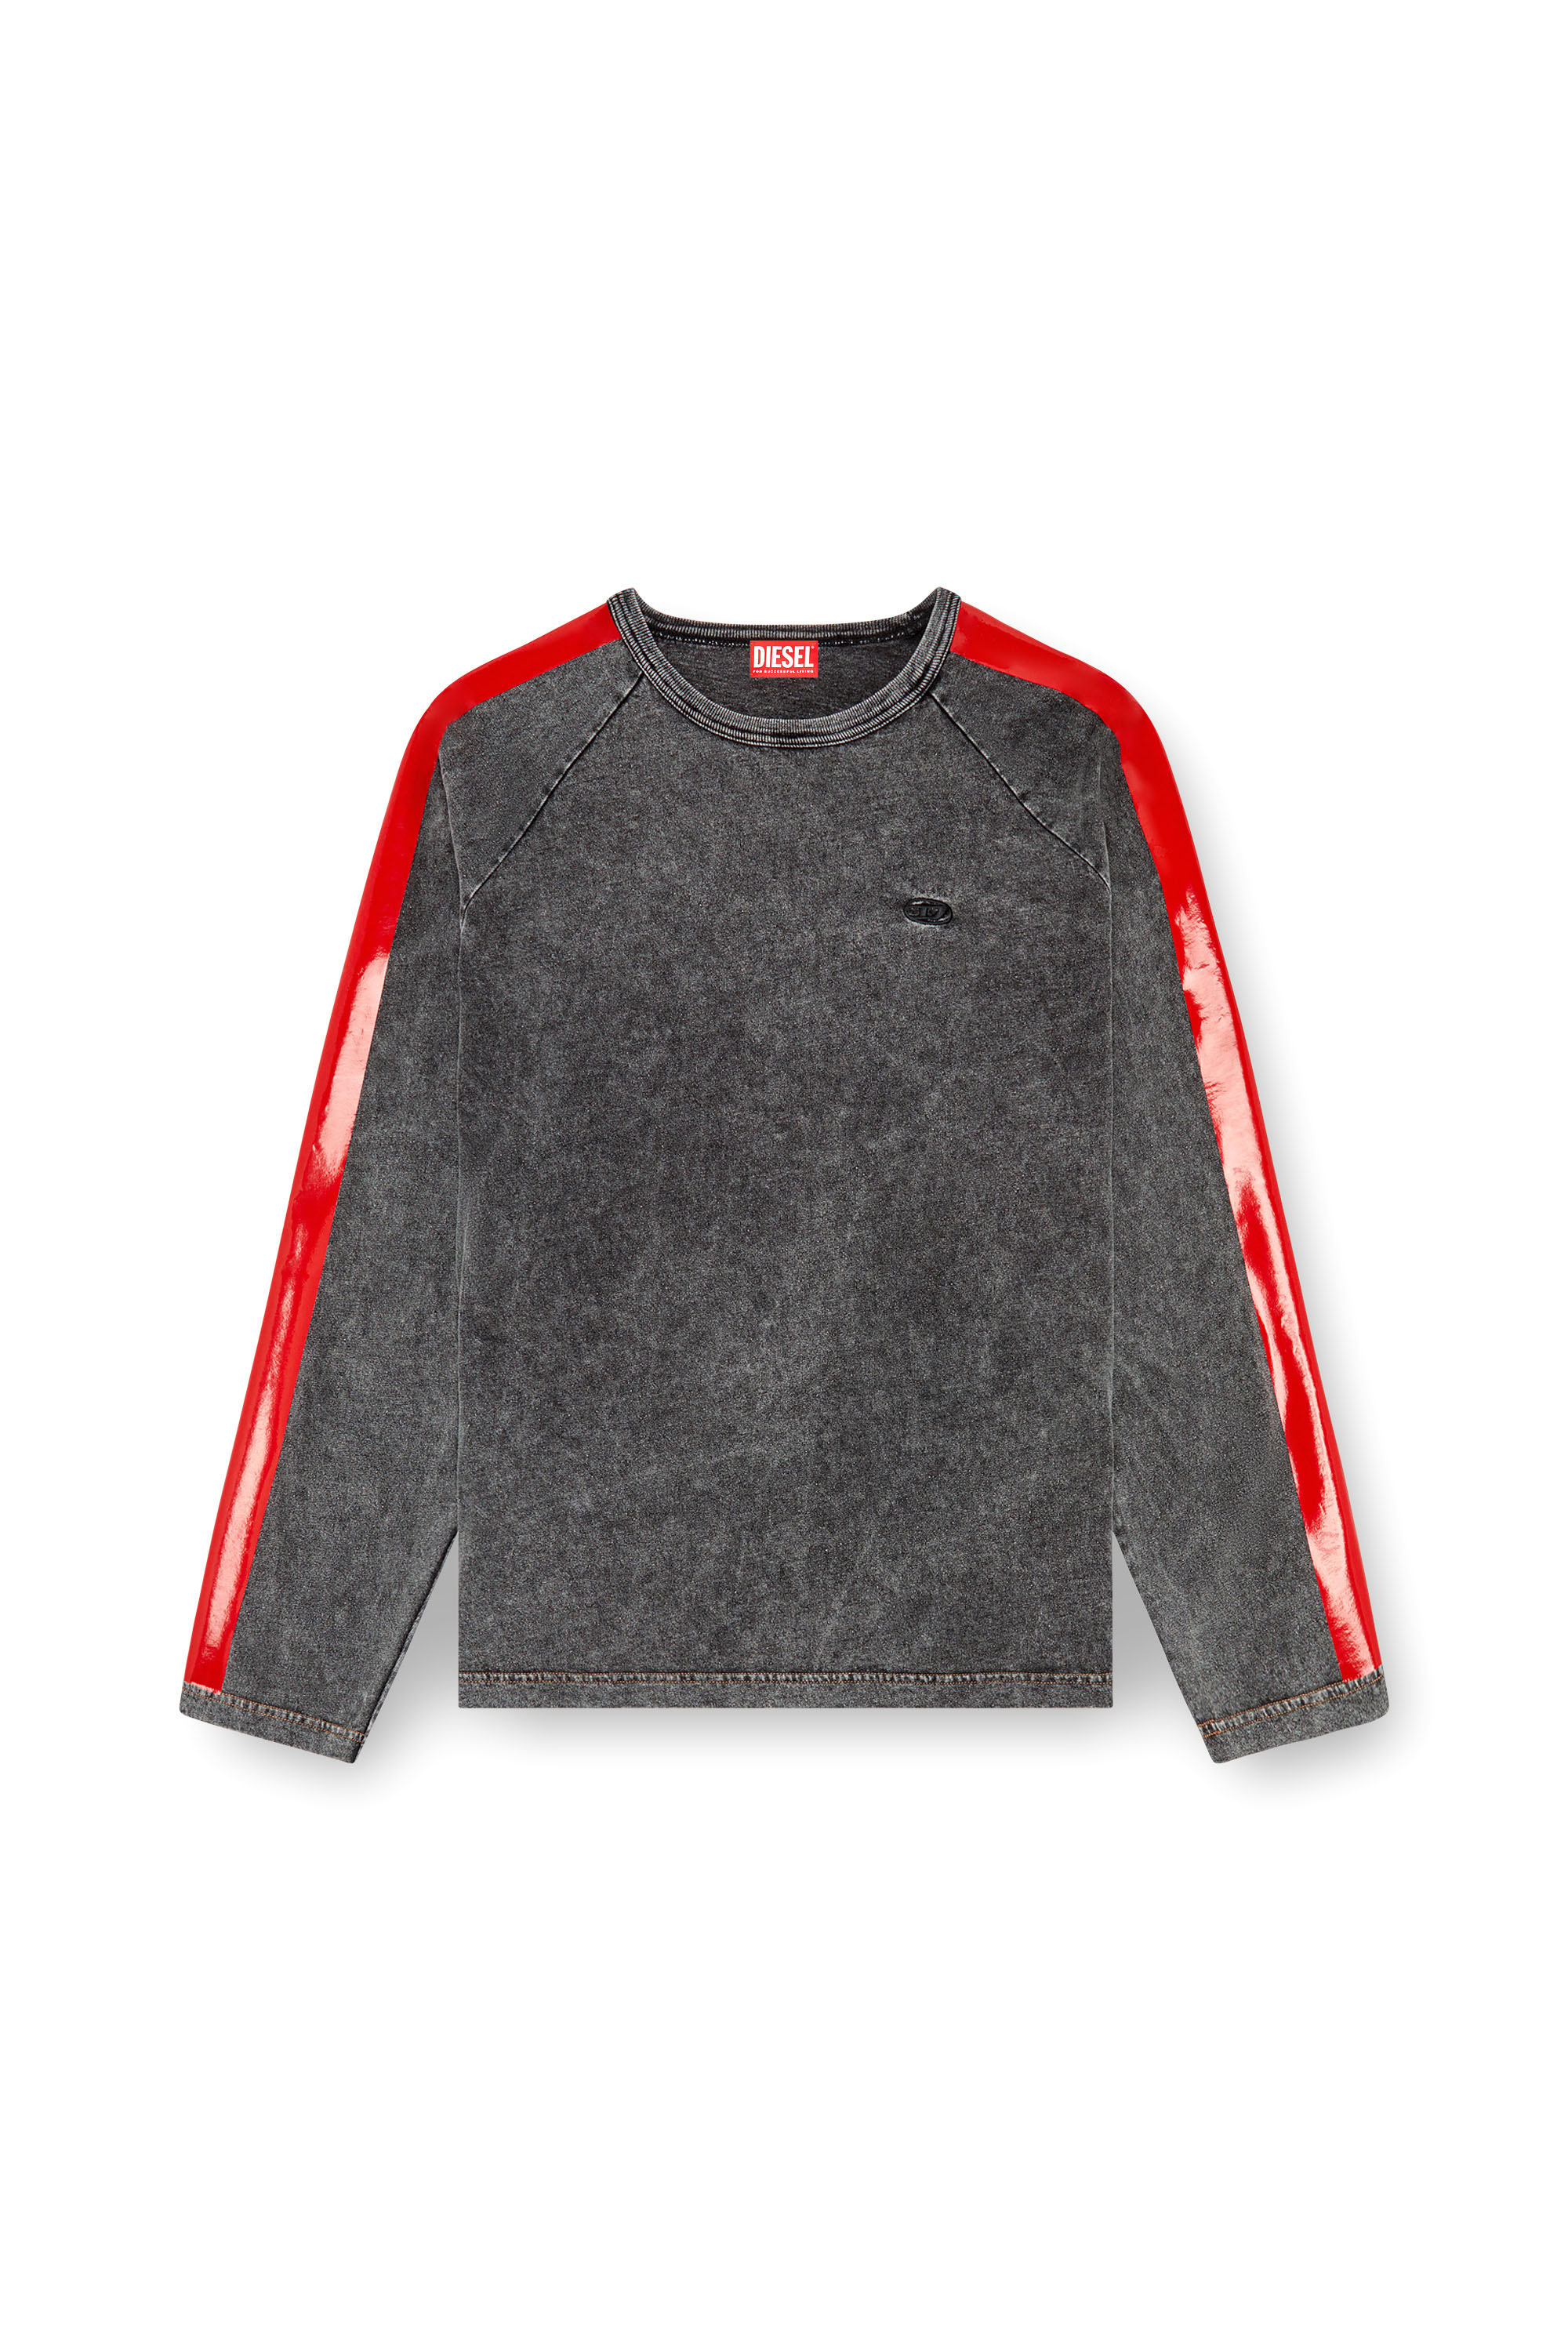 Diesel - T-REDROXT, Uomo T-shirt a maniche lunghe con fasce lucide in Nero - Image 3